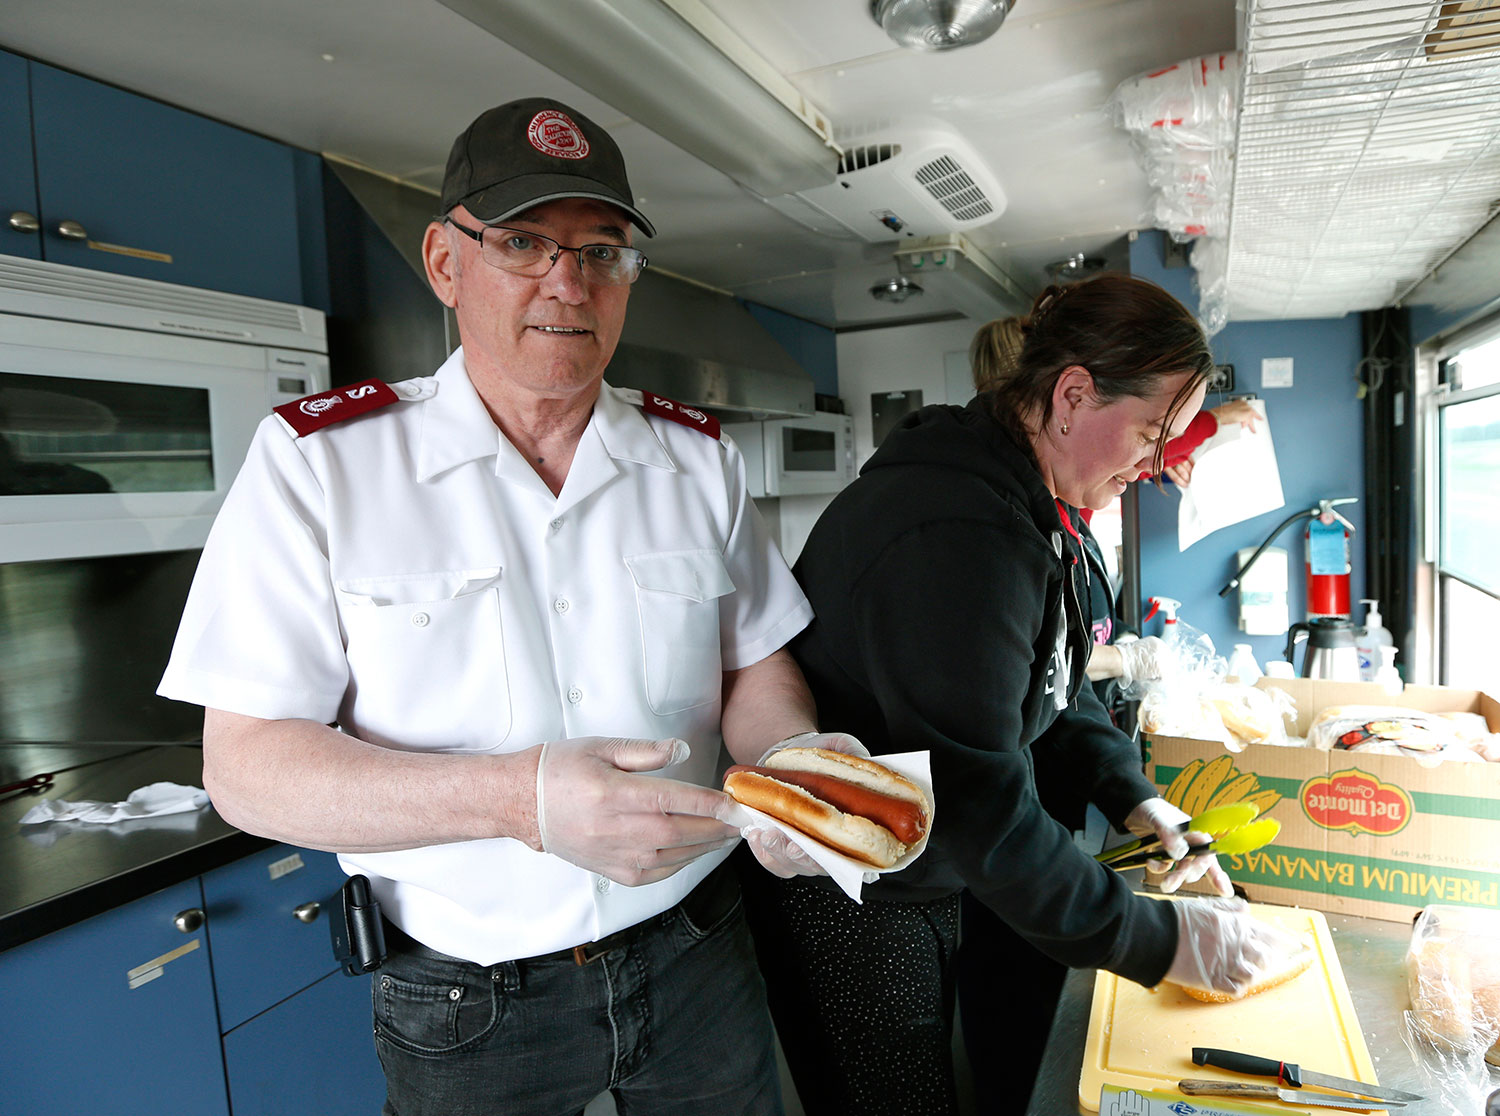 The Salvation Army prepares food for first responders in Fort McMurray